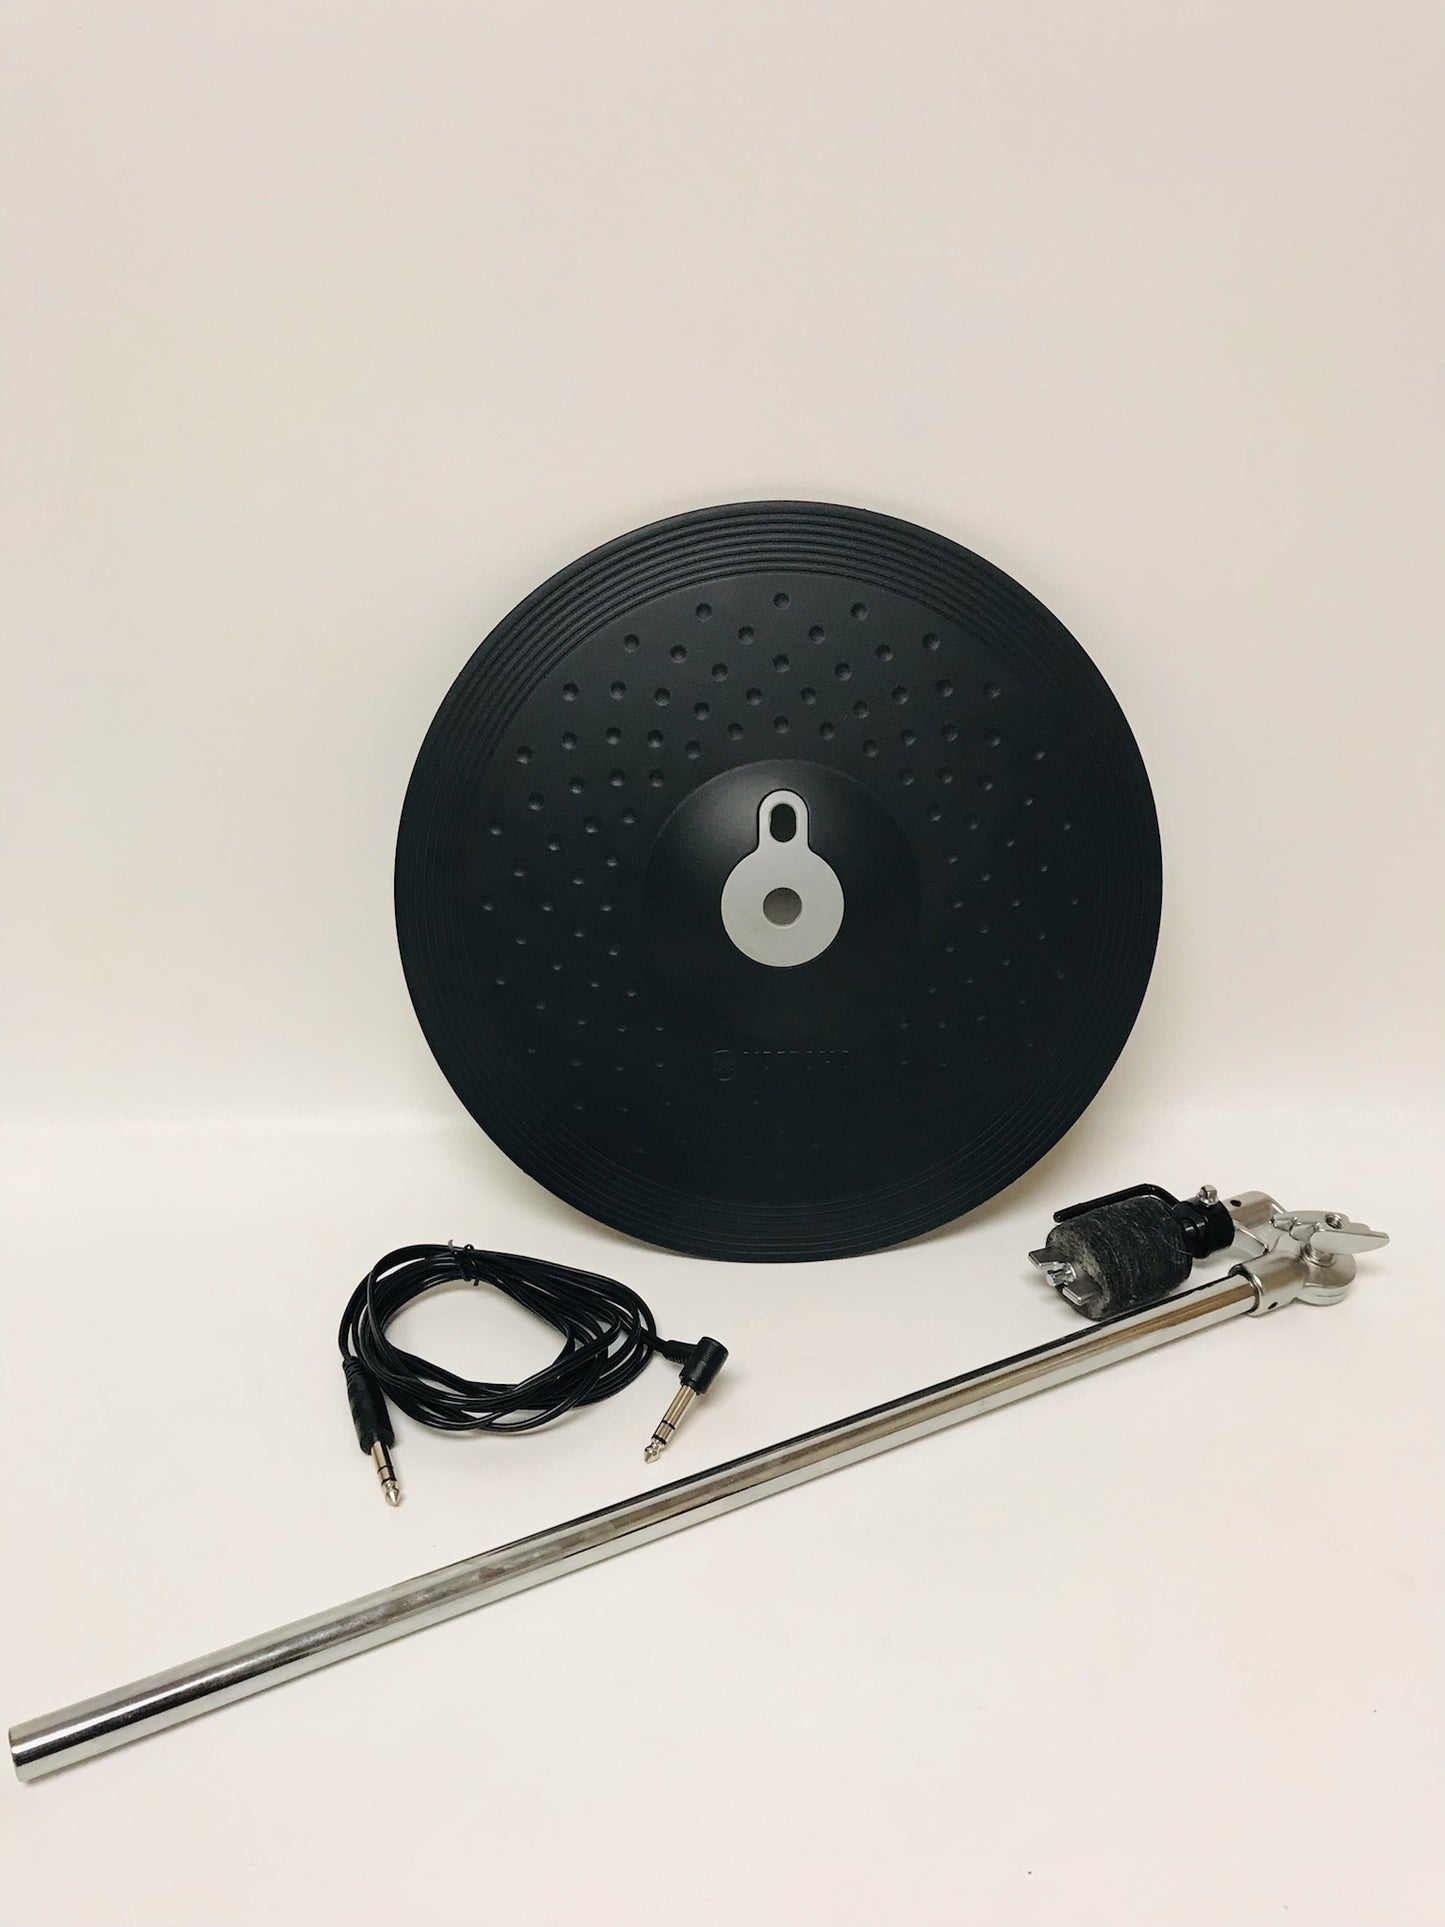 Yamaha PCY-135 Cymbal with Arm and Cable